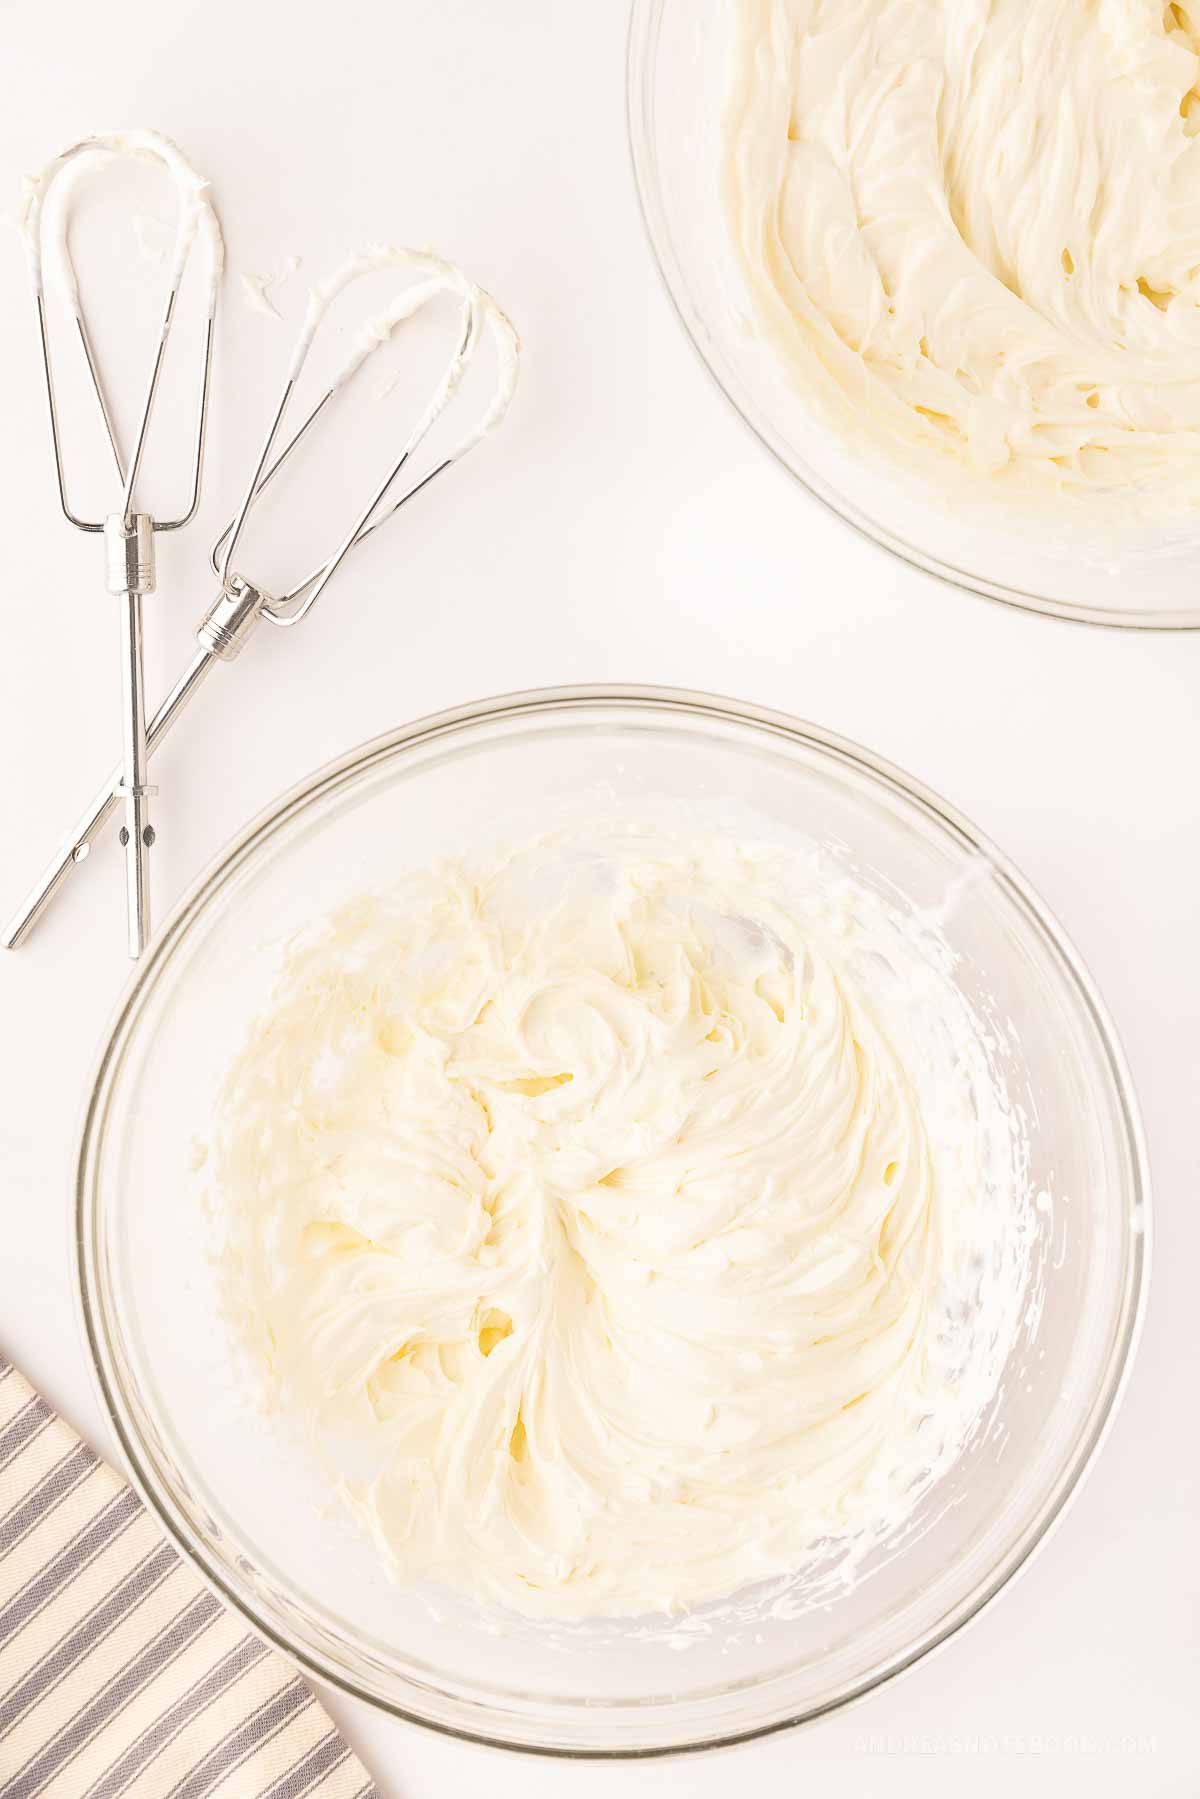 whipped cream with stiff peaks.